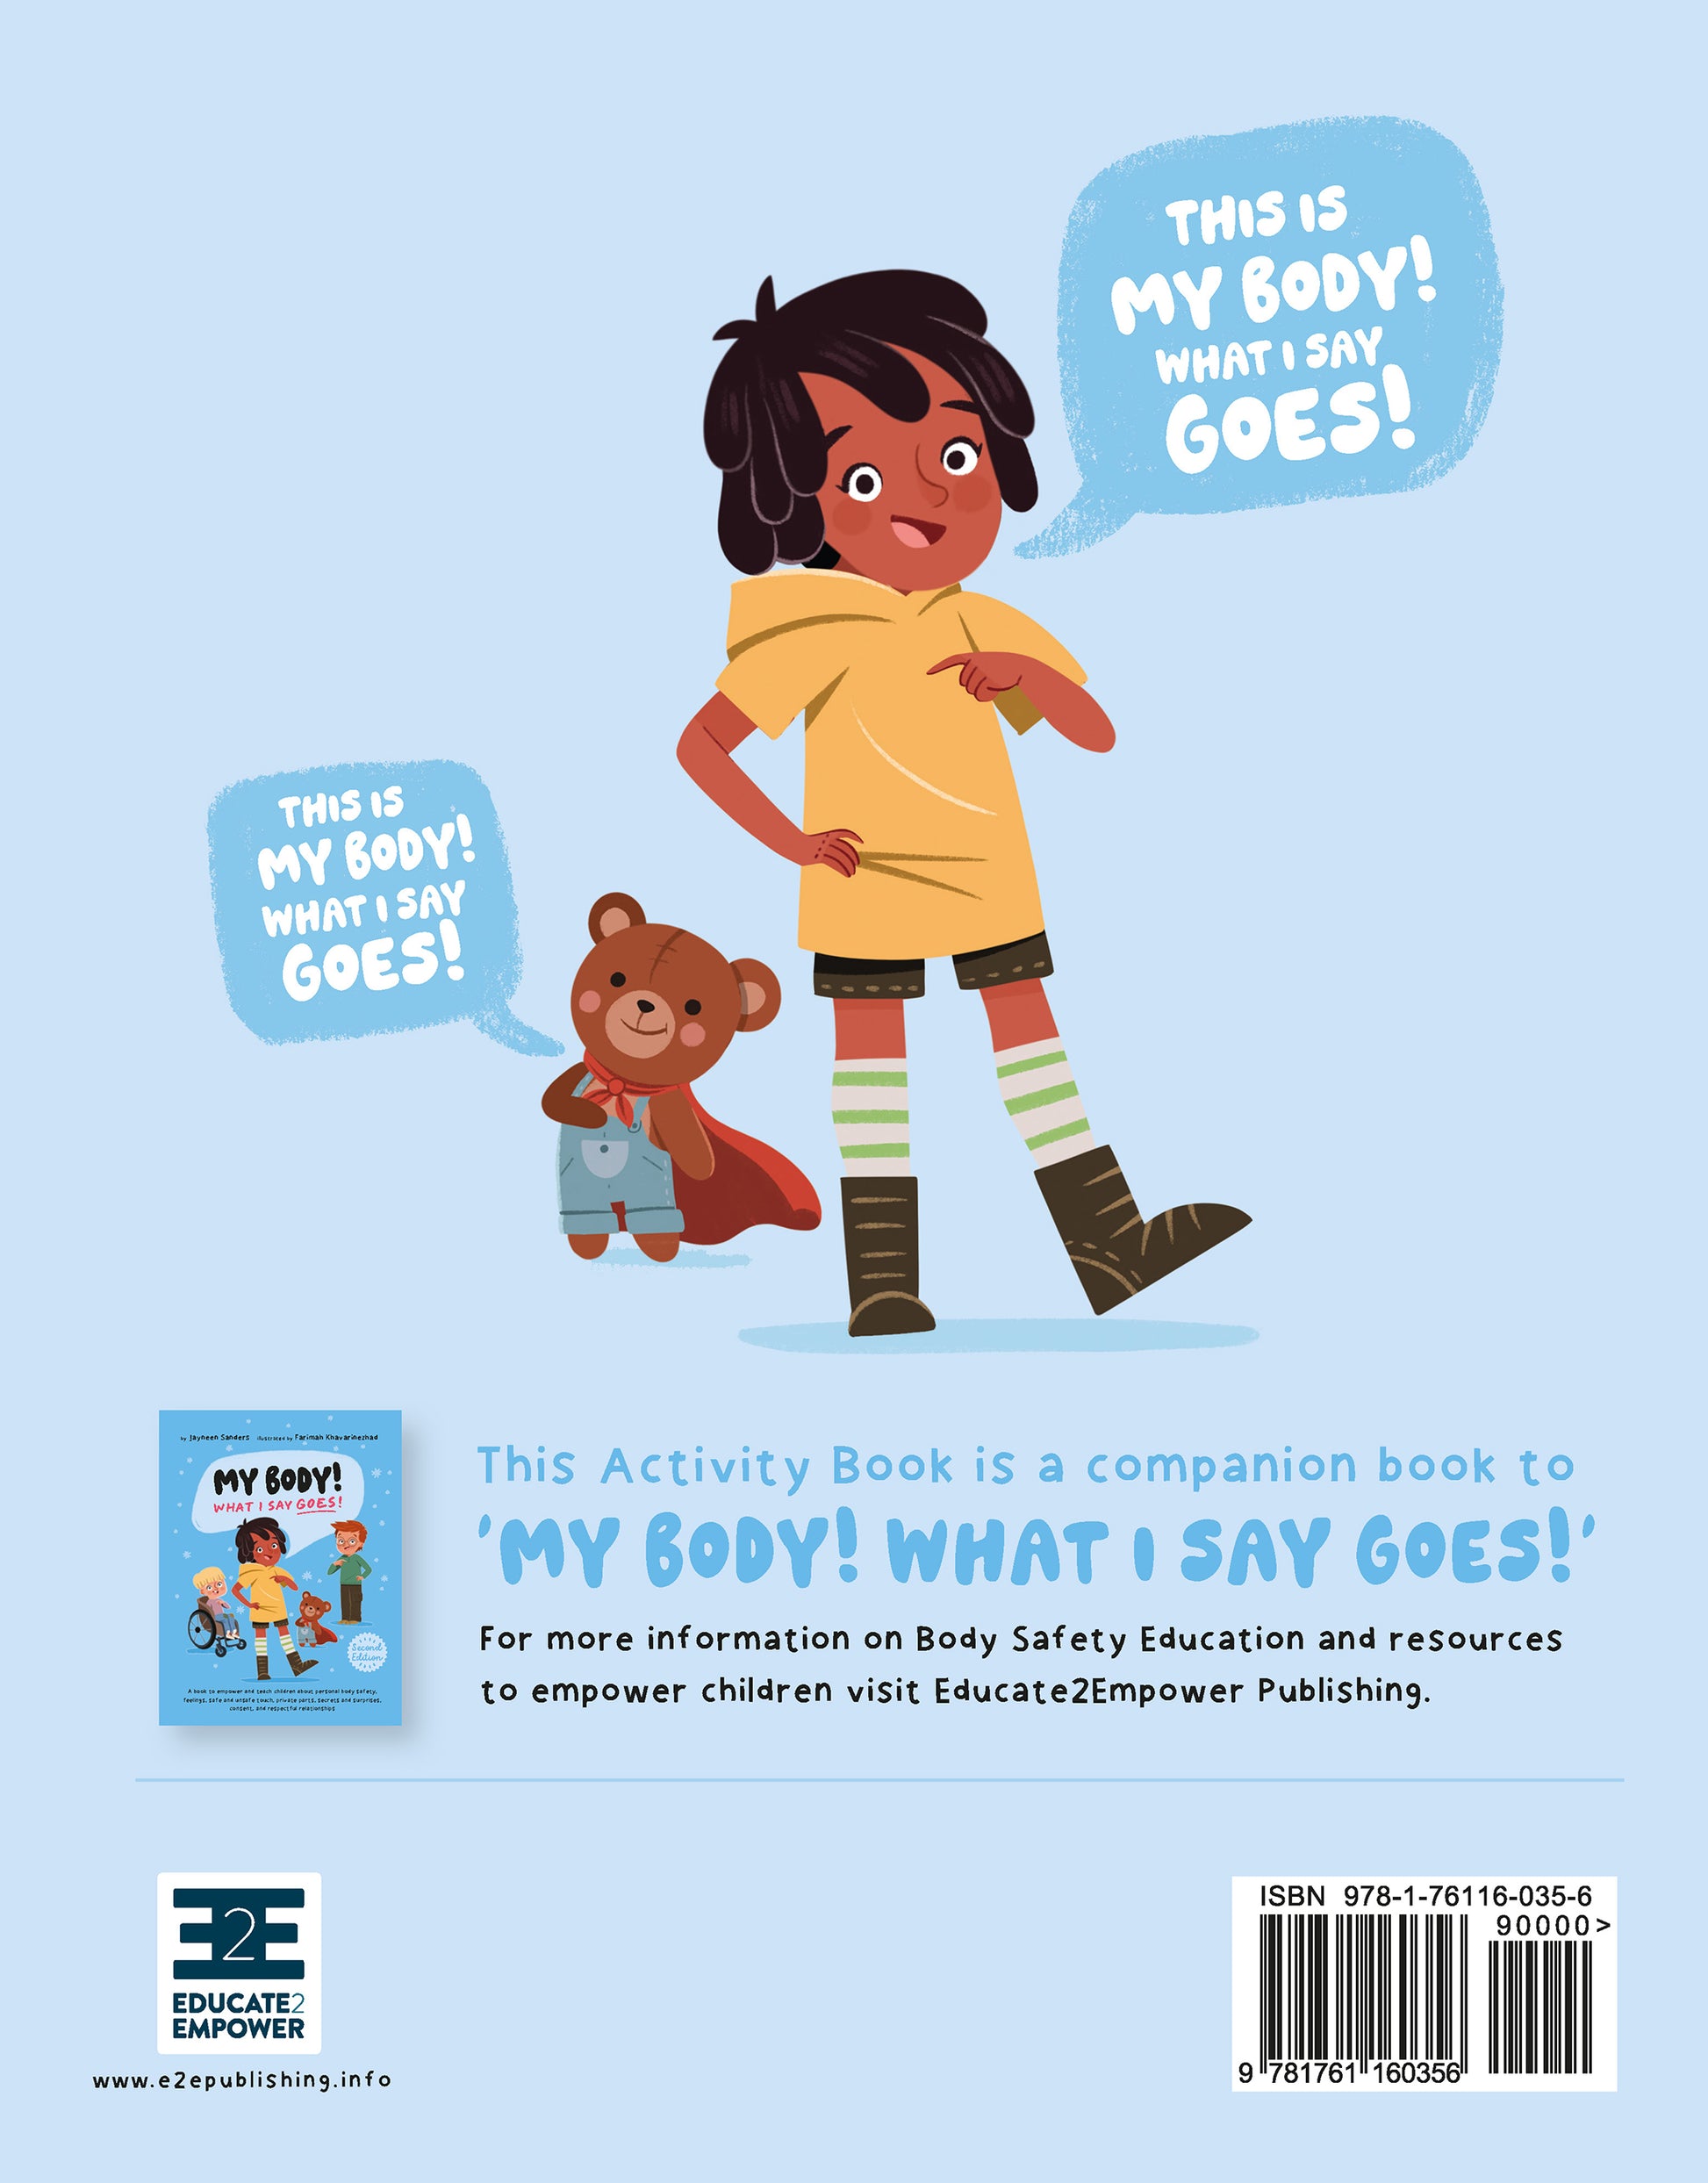 The back cover of the book ‘My Body! What I Say Goes! Activity Book’ by Jayneen Sanders.